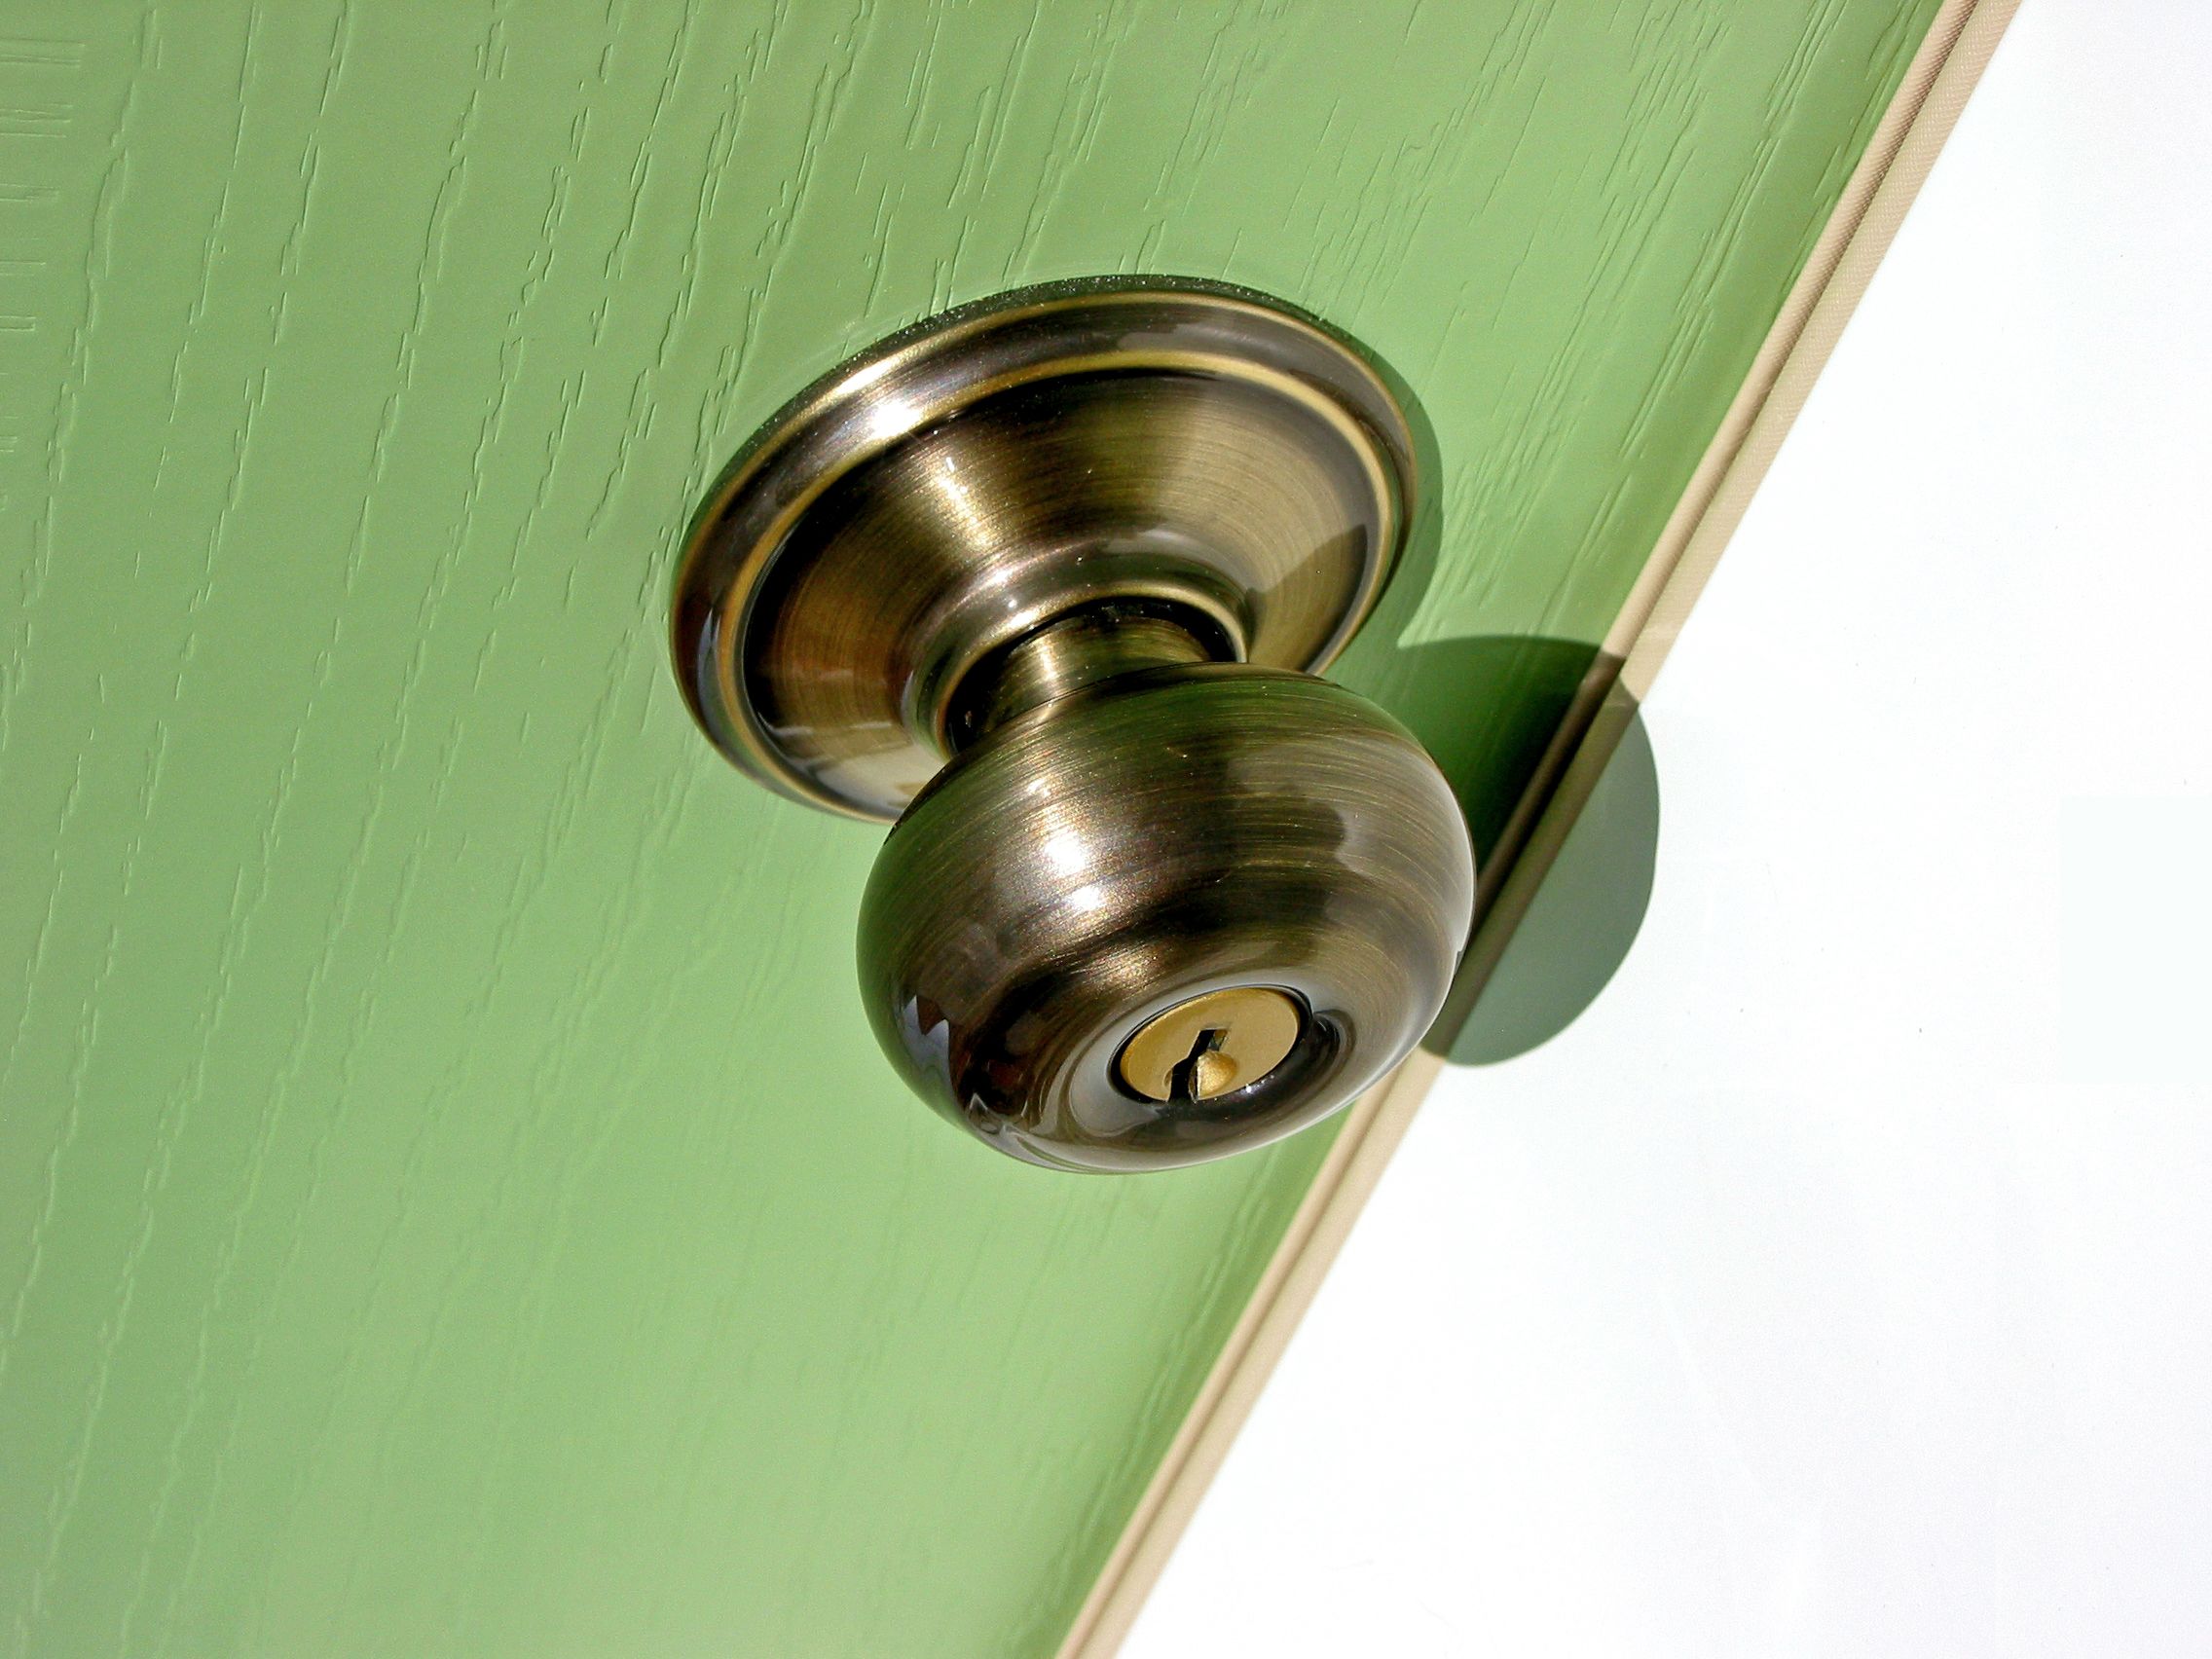 The Surprising Reason Most Doorknobs Are Made of Brass